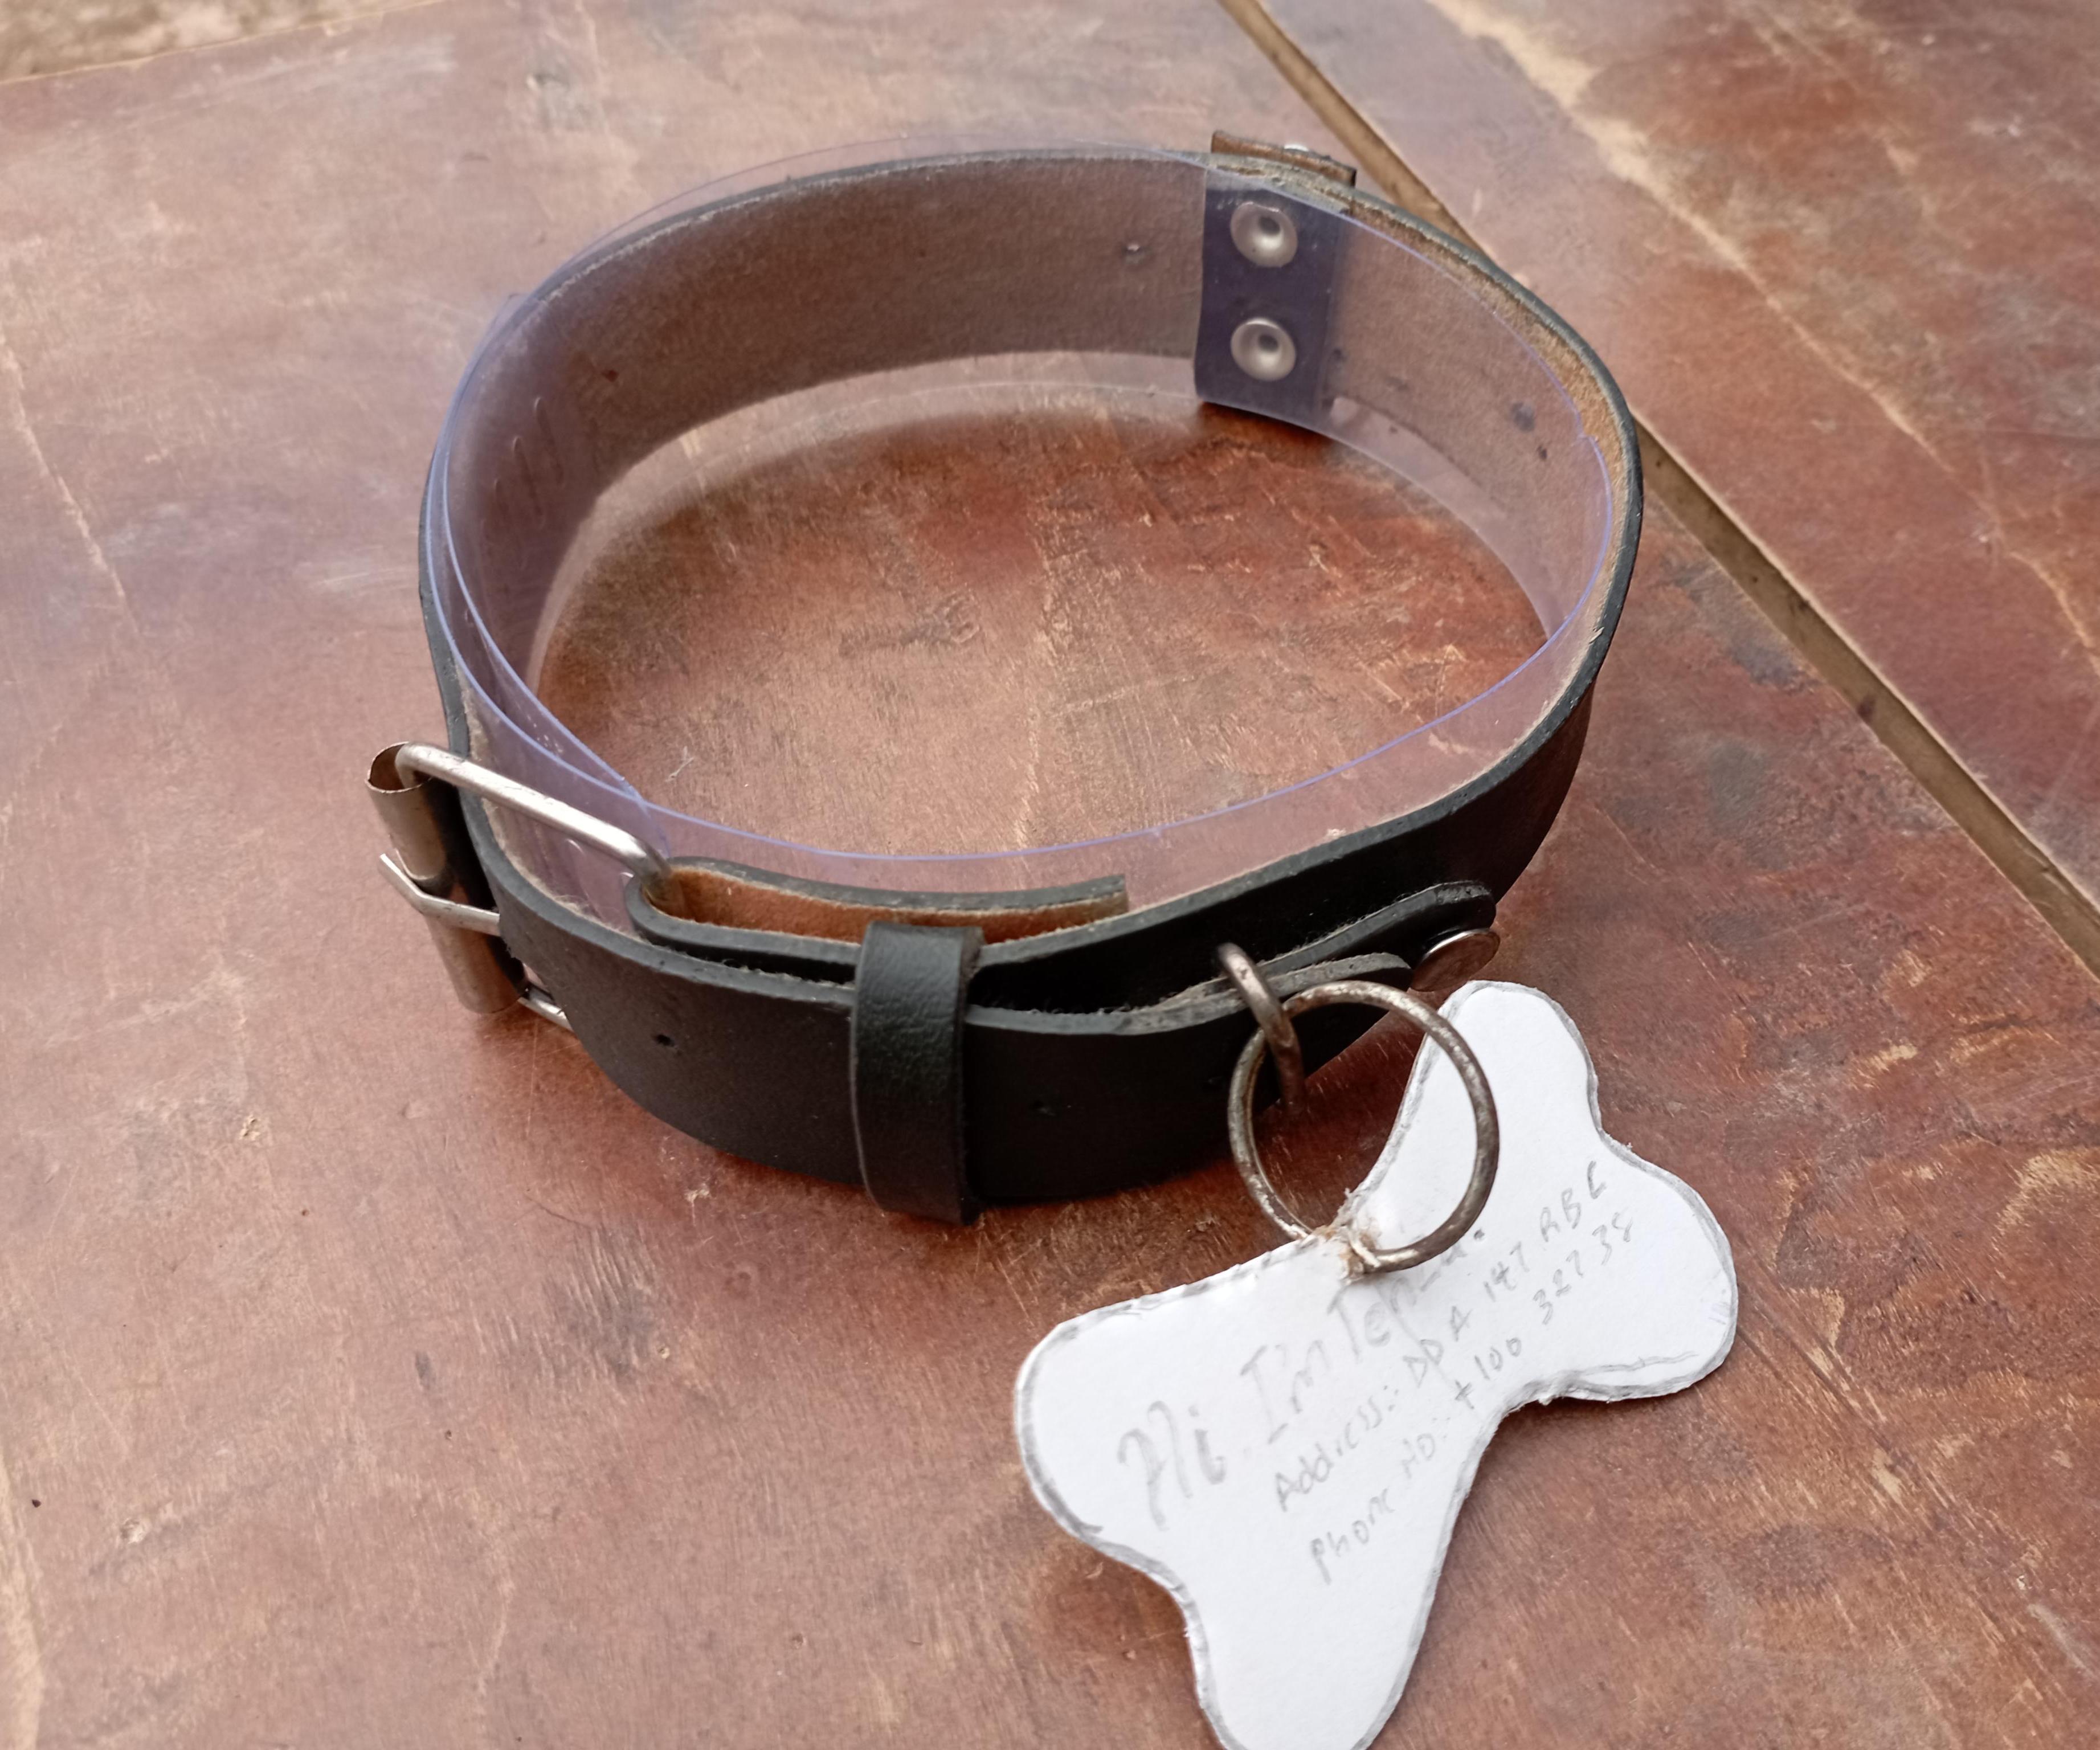 DIY Pet Collar: Homemade Leather Pet Collar From Old Belts.